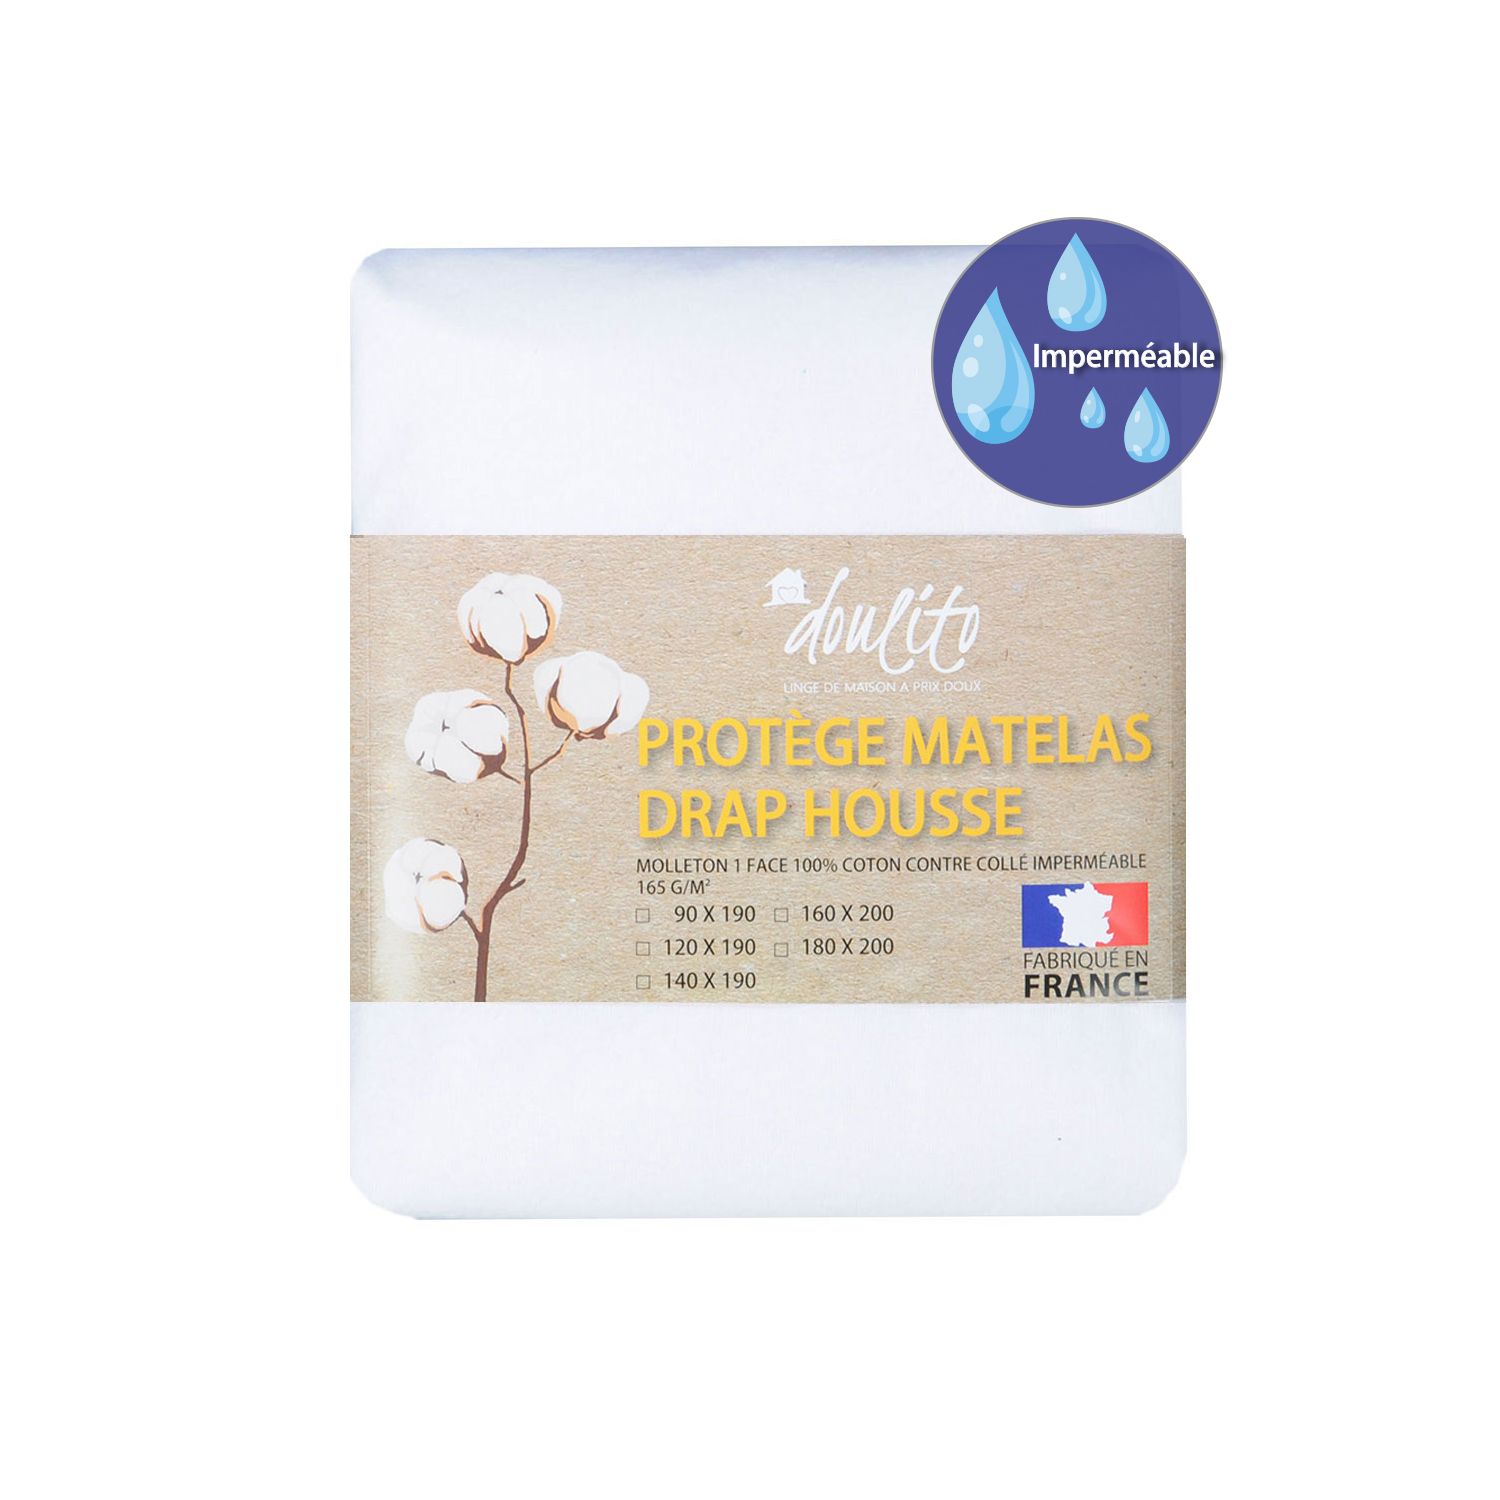 Protège matelas imperméable Doulito - 90x190 cm - Made in France - Coton